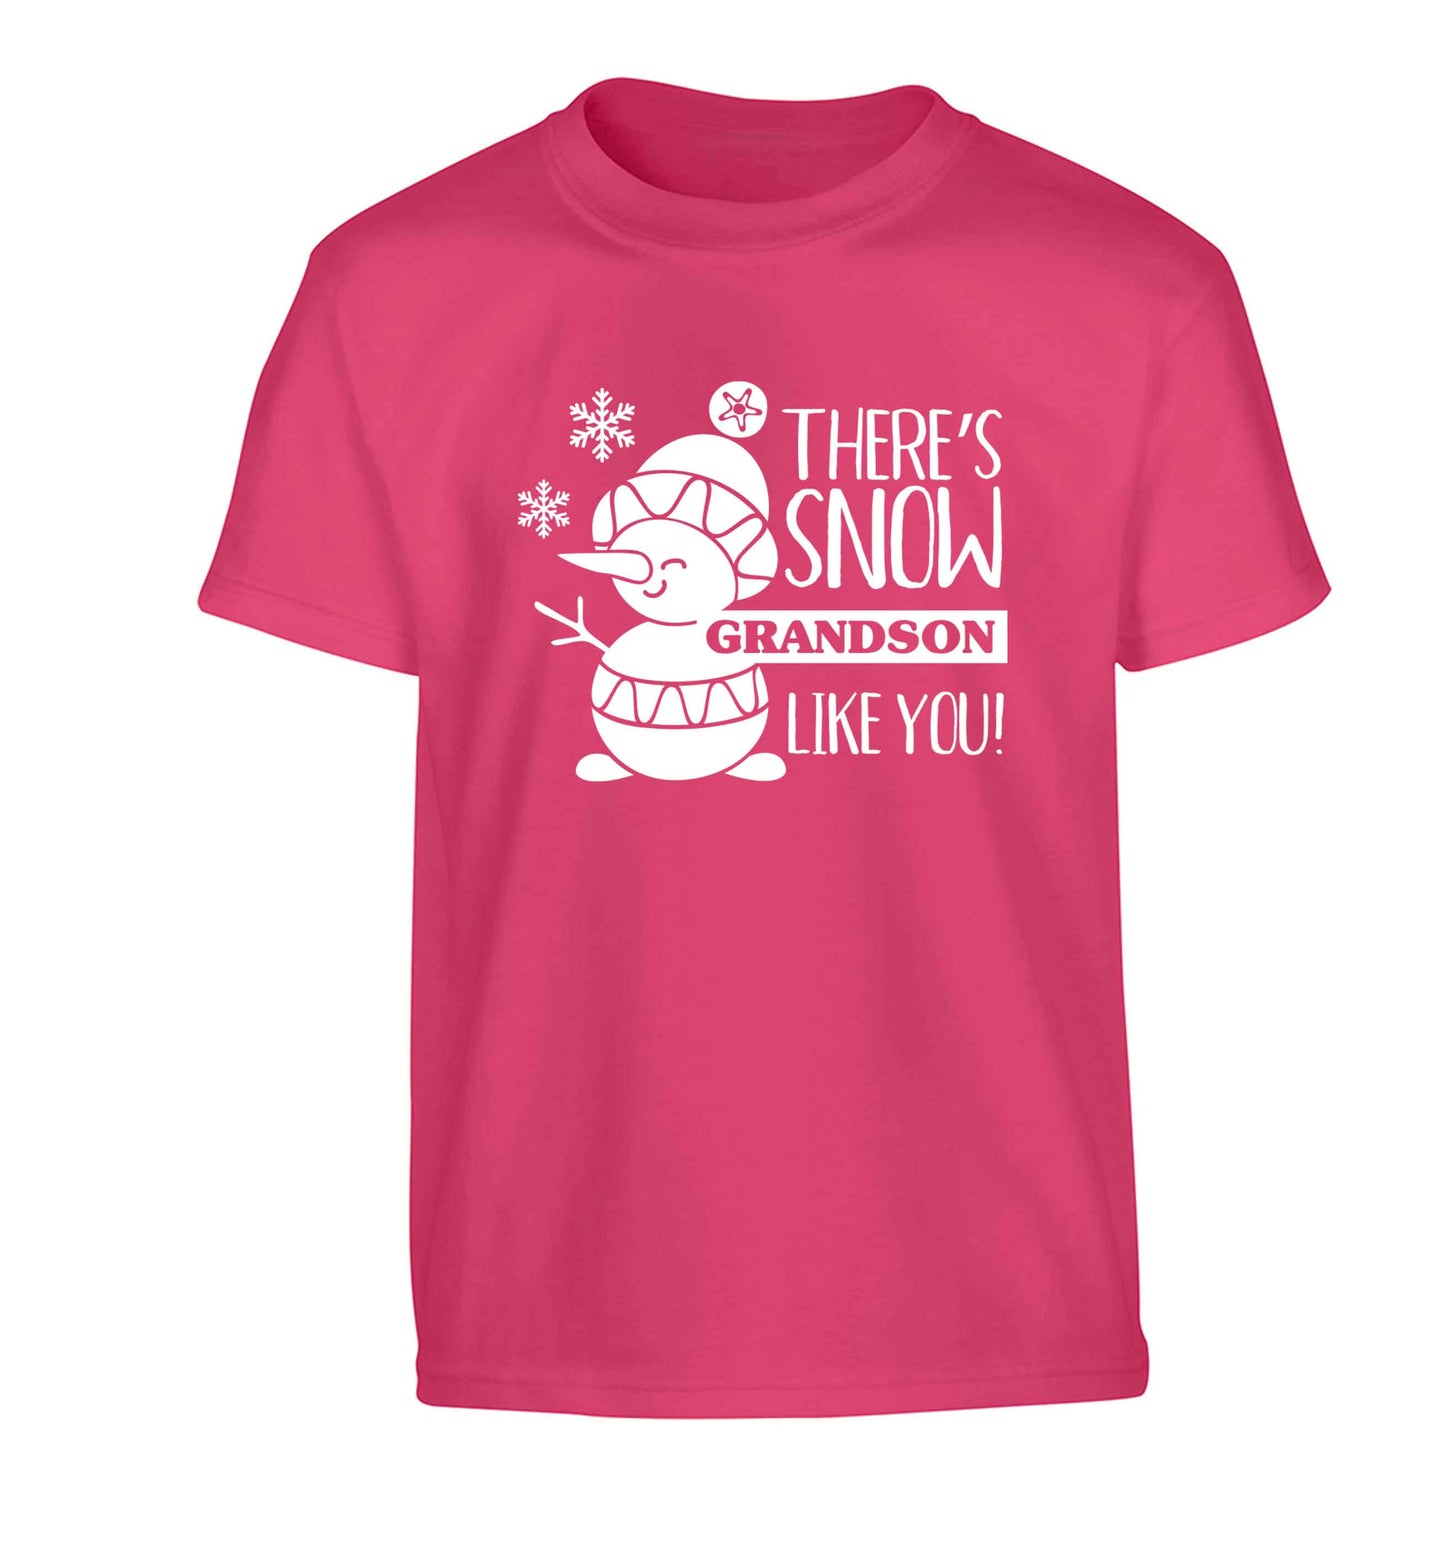 There's snow grandson like you Children's pink Tshirt 12-13 Years